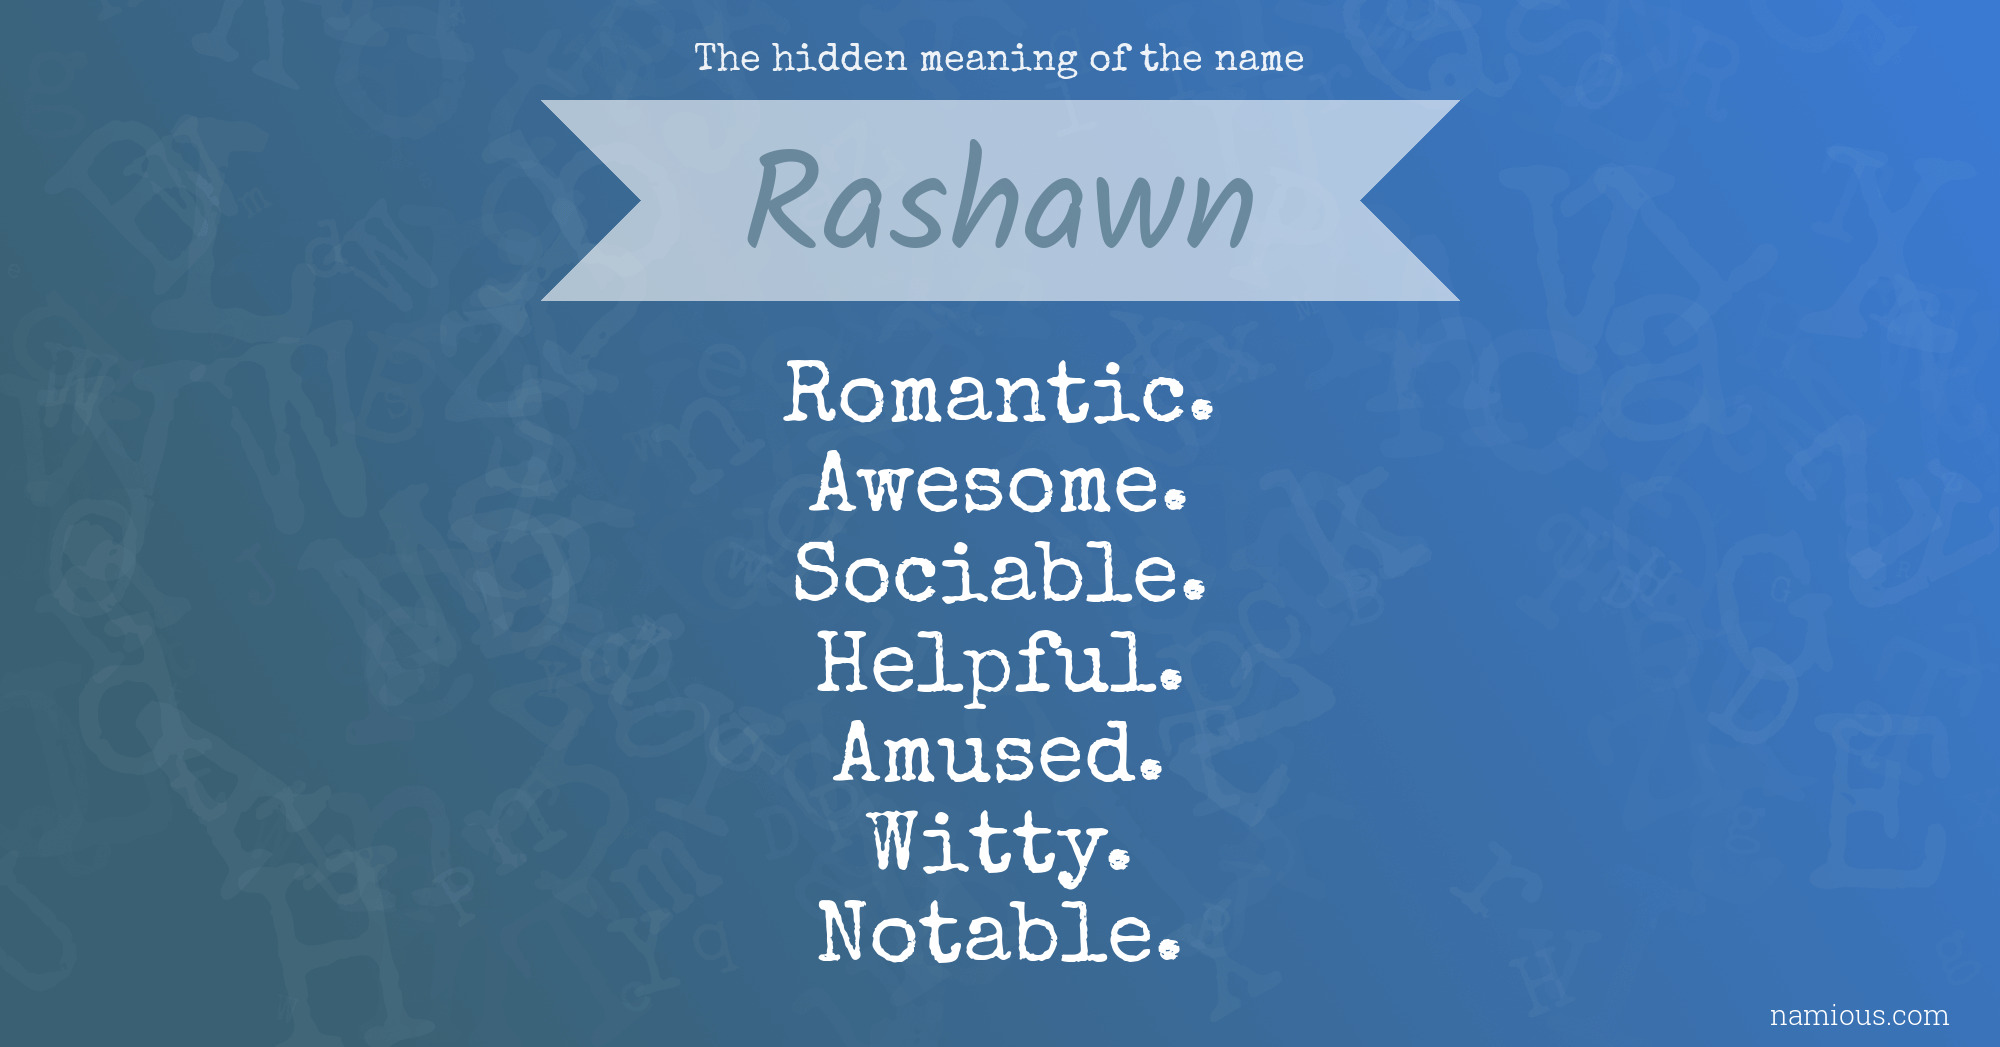 The hidden meaning of the name Rashawn